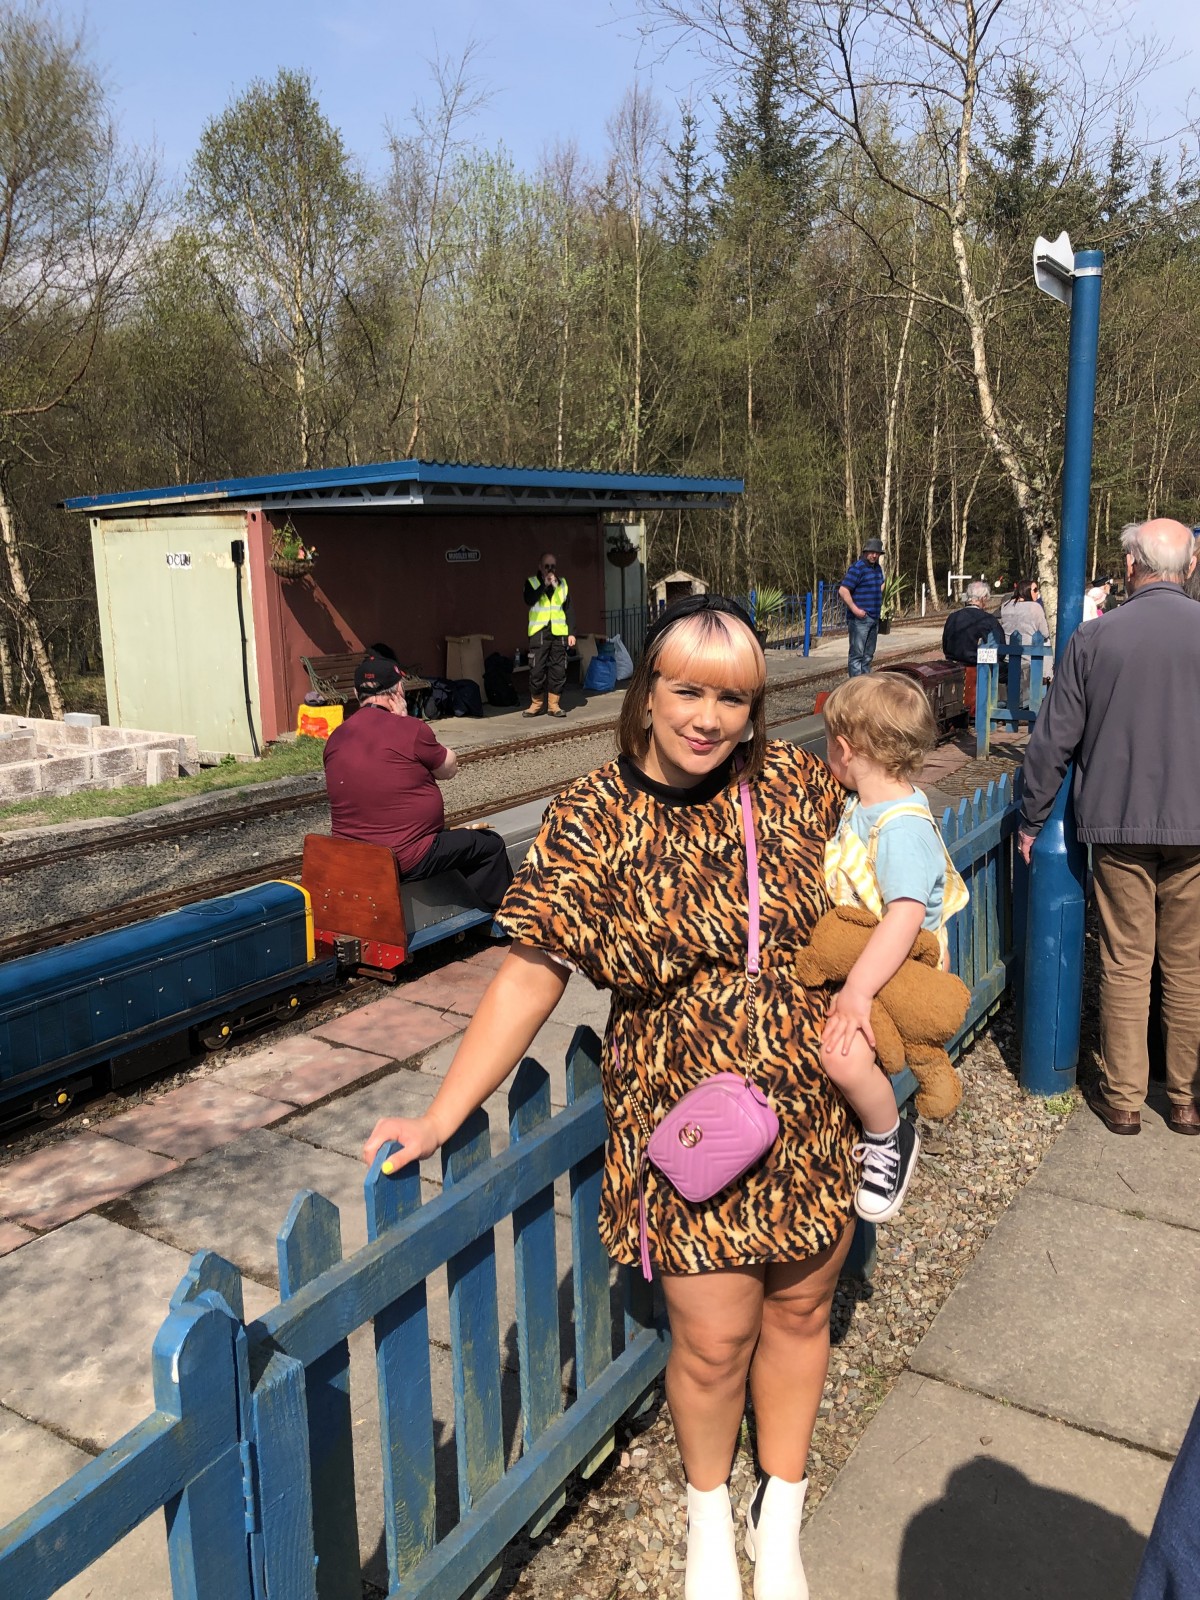 Small City Sam and her toddler River enjoyed a day in the Sunshine at Wester Pickston Railway in Perthshire.